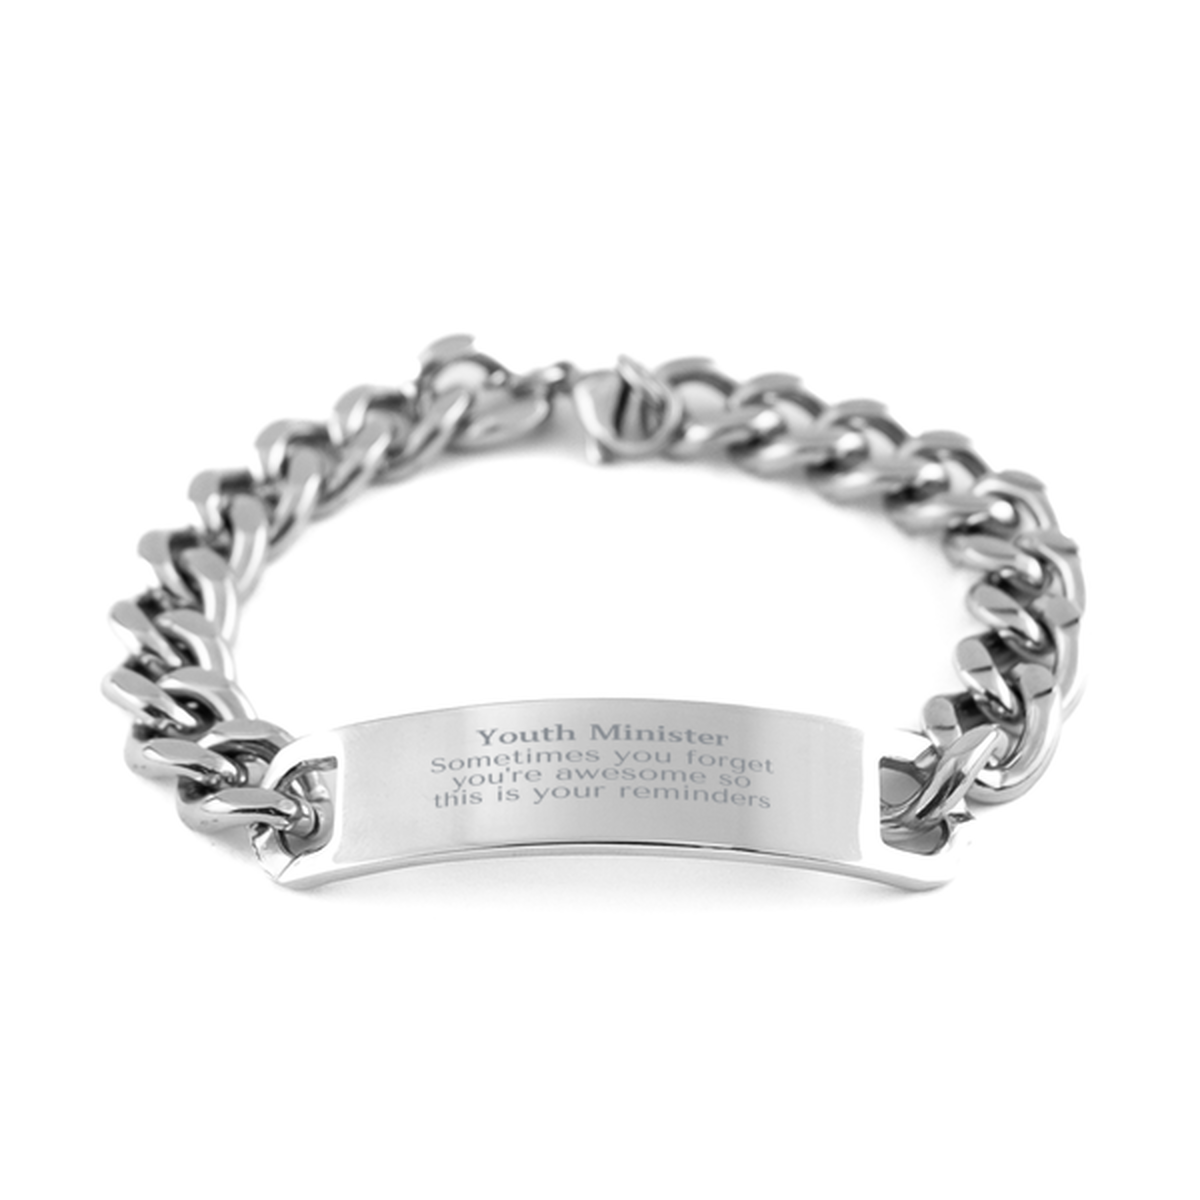 Sentimental Youth Minister Cuban Chain Stainless Steel Bracelet, Youth Minister Sometimes you forget you're awesome so this is your reminders, Graduation Christmas Birthday Gifts for Youth Minister, Men, Women, Coworkers